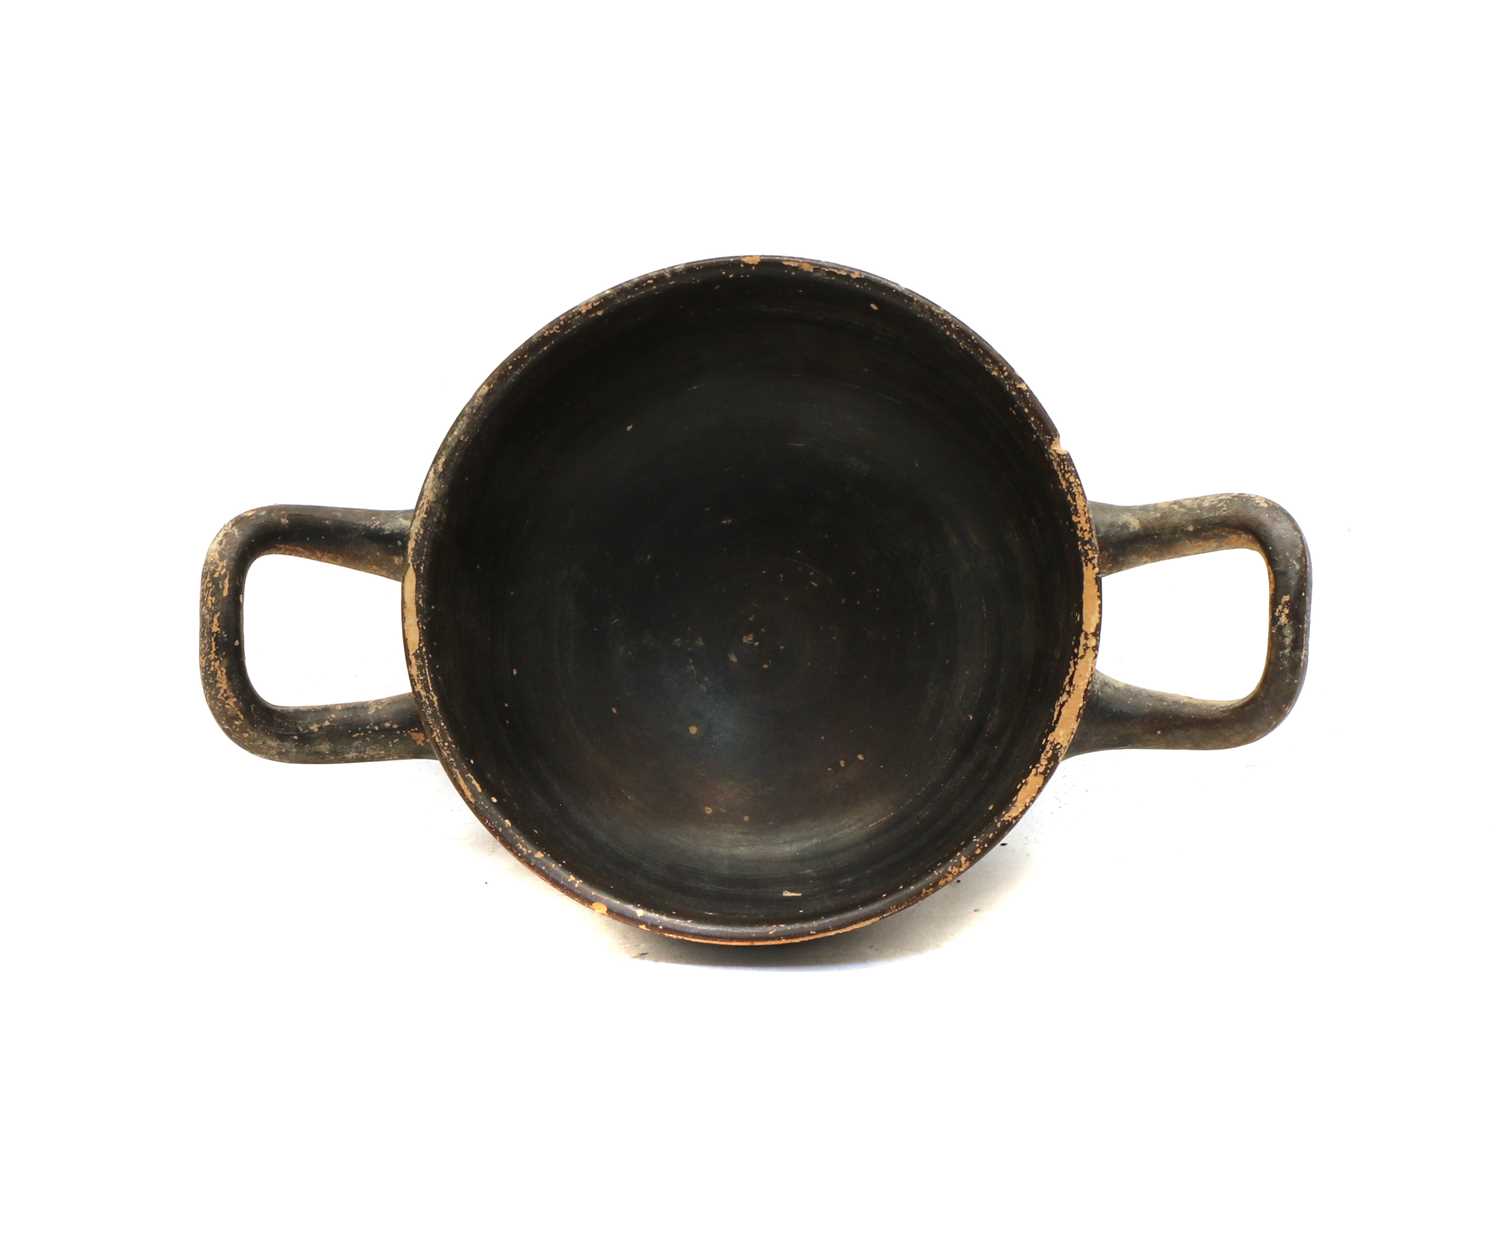 An Attic kylix, - Image 3 of 4